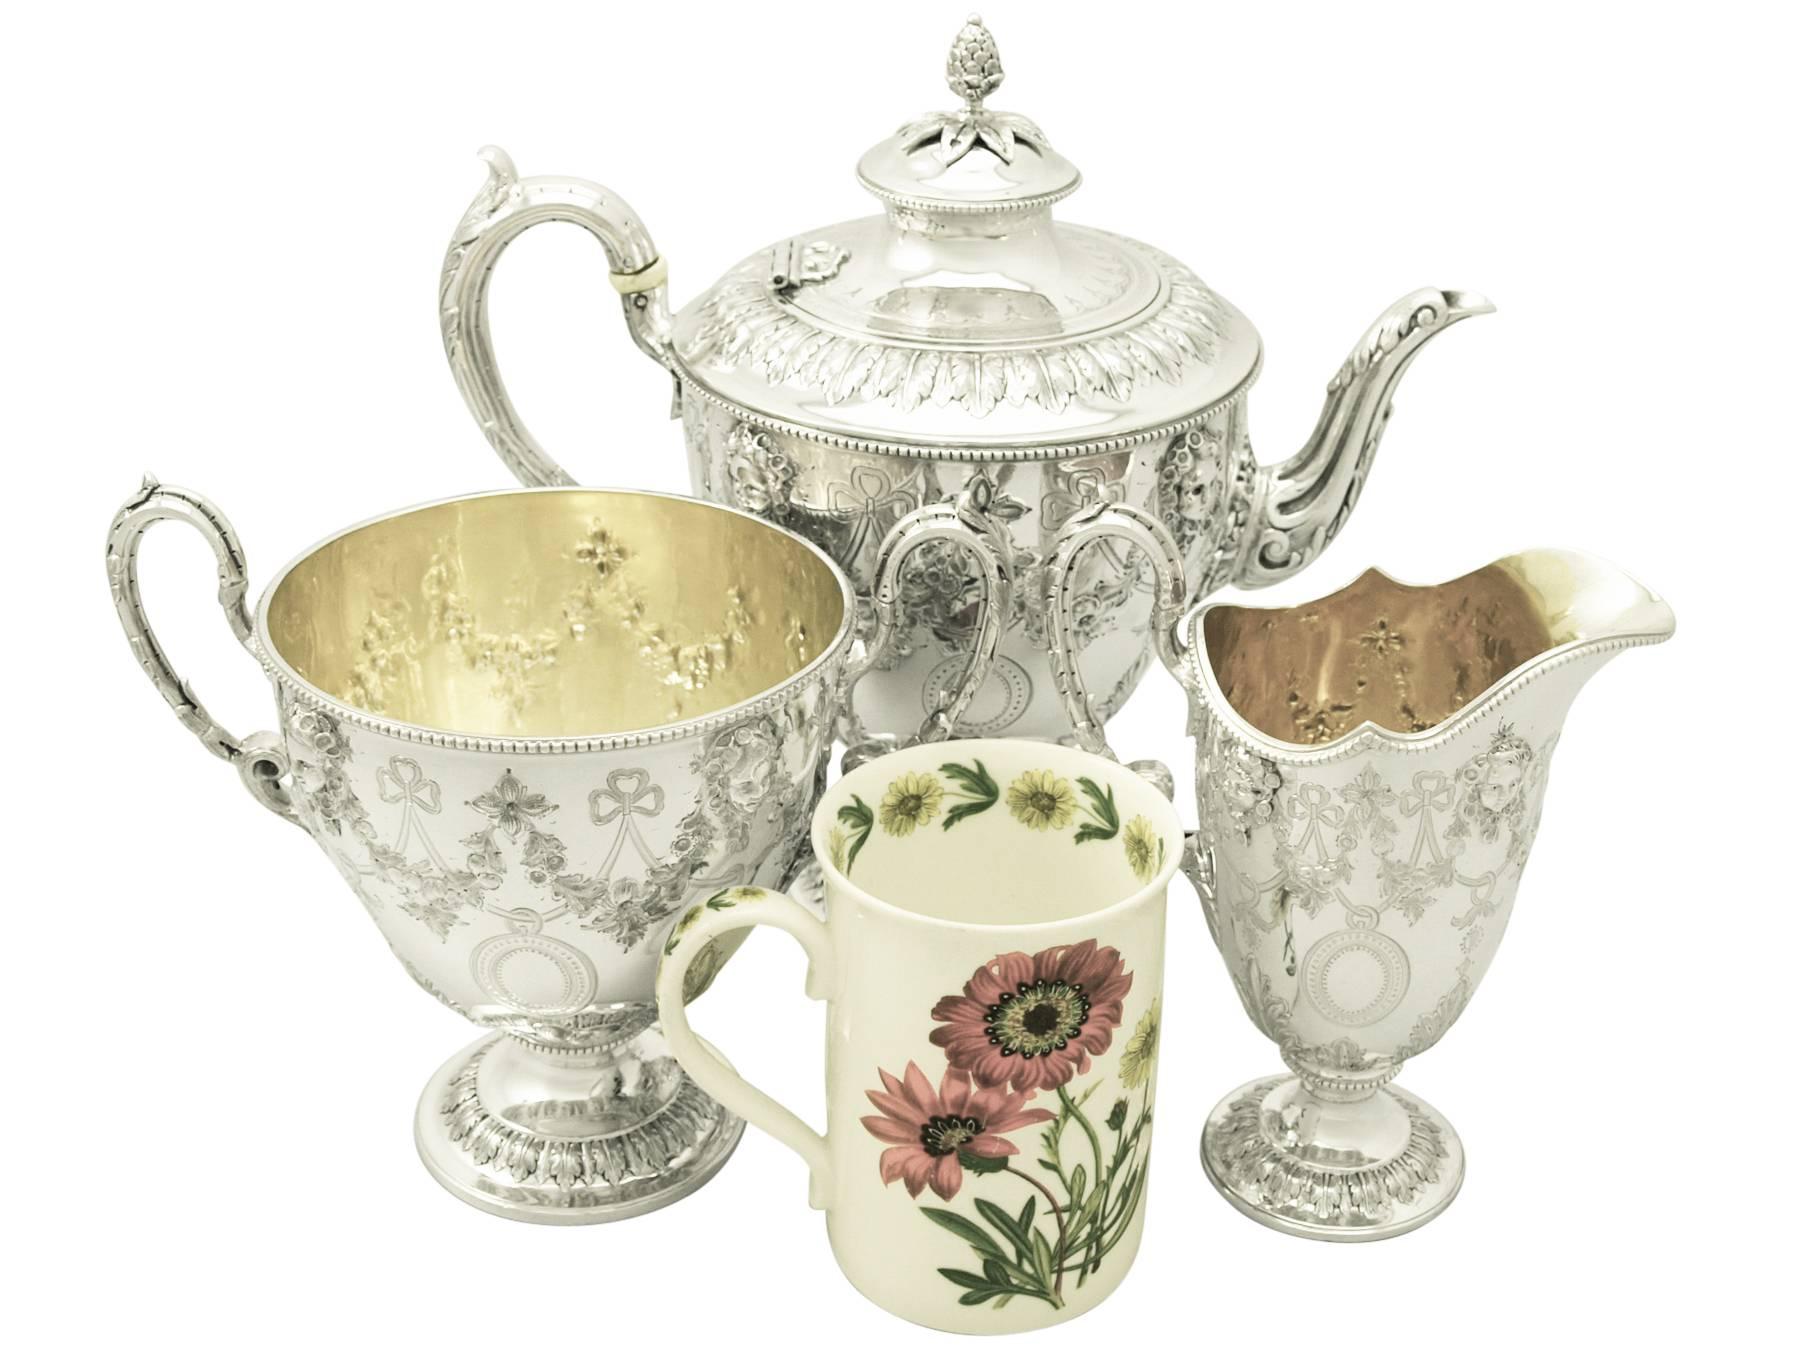 An exceptional antique Victorian English sterling silver three-piece tea service; part of our silver teaware collection.

This fine antique Victorian sterling silver three-piece tea set/service consists of a teapot, cream jug / creamer and sugar